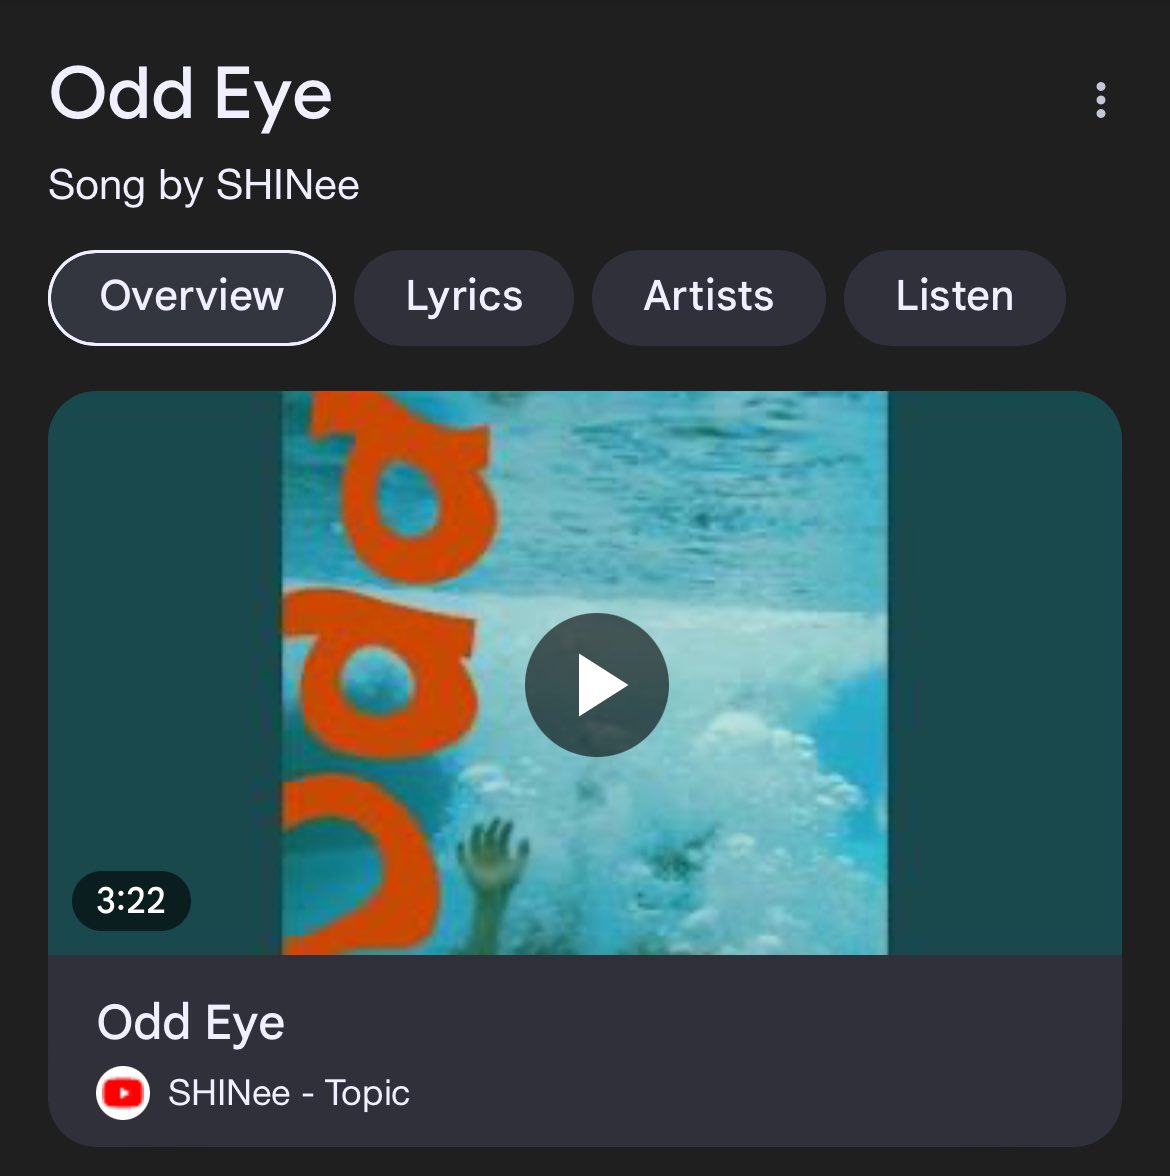 orbits already started with the “omg the loona inspiration!!!” shit… as if heterochromia was invented for the sole purpose of being in loona’s lore and as if shinee (SM GROUP) didn’t do the odd eye thing for Odd in 2015, way before oec even debuted